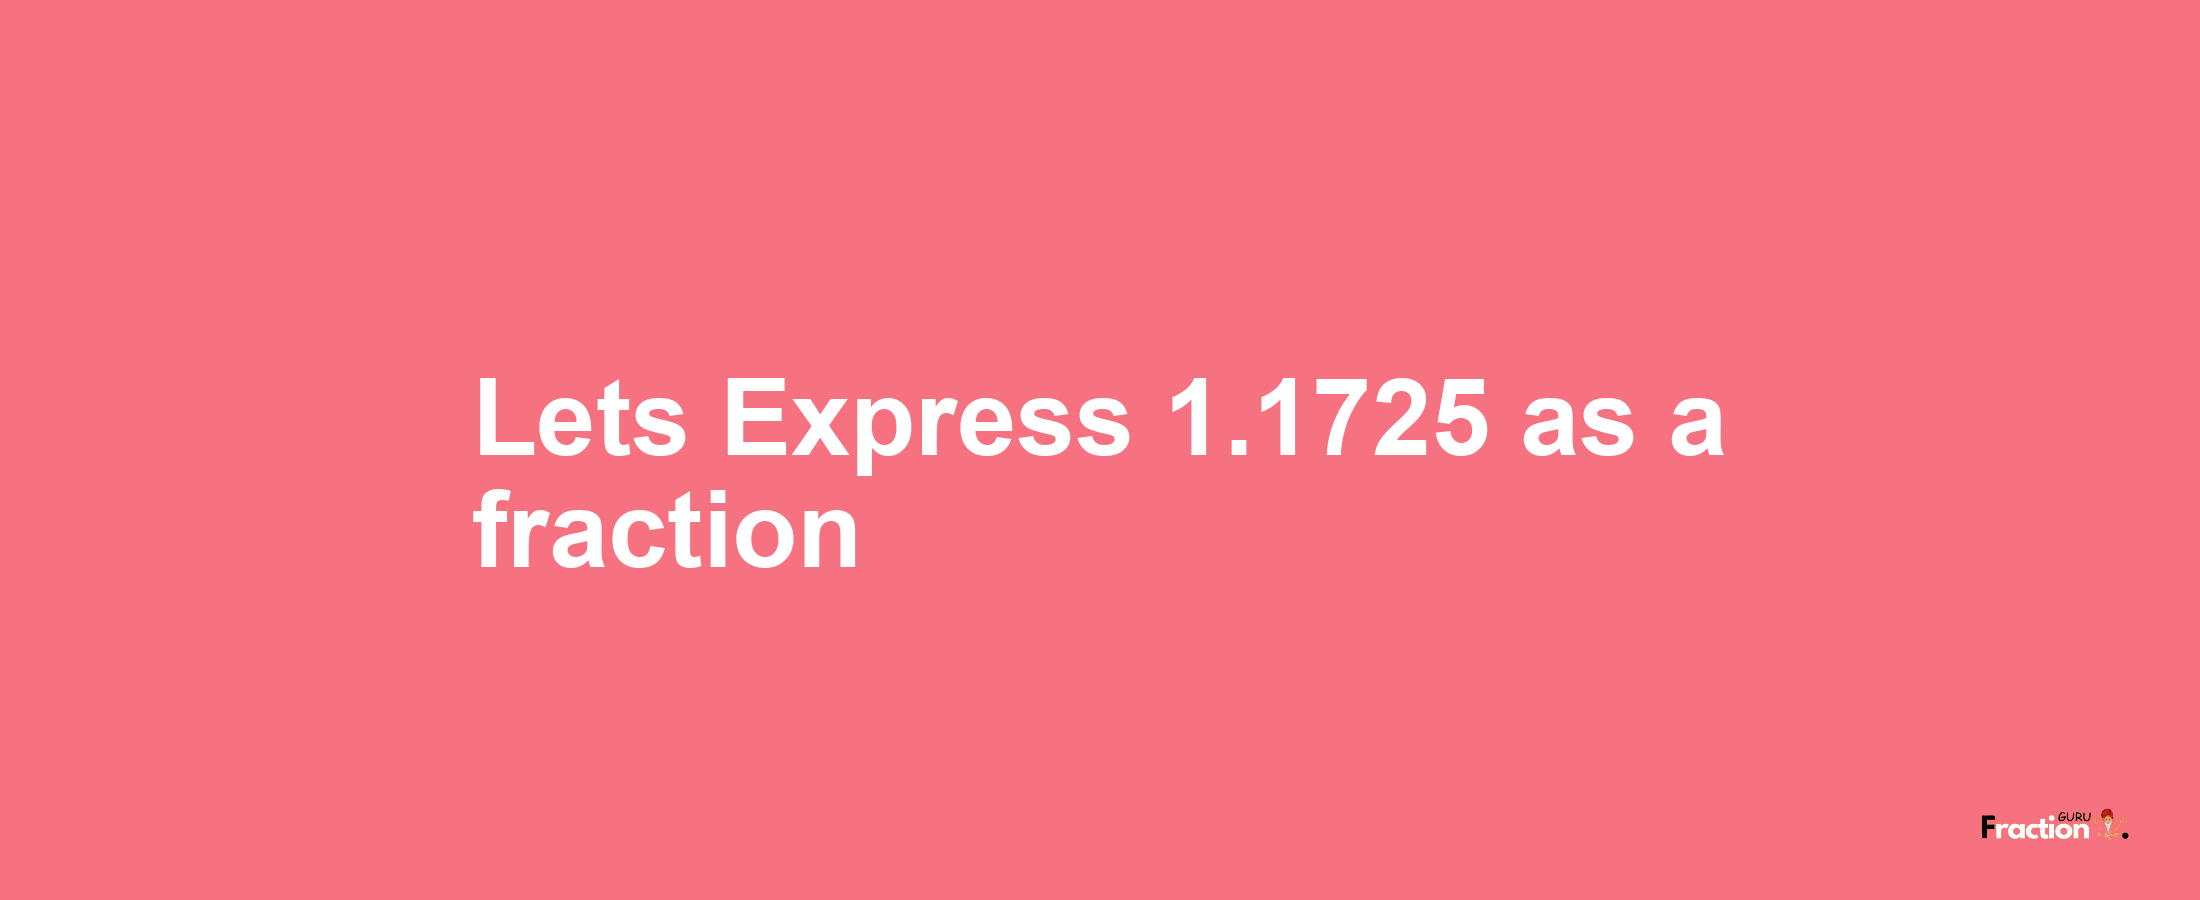 Lets Express 1.1725 as afraction